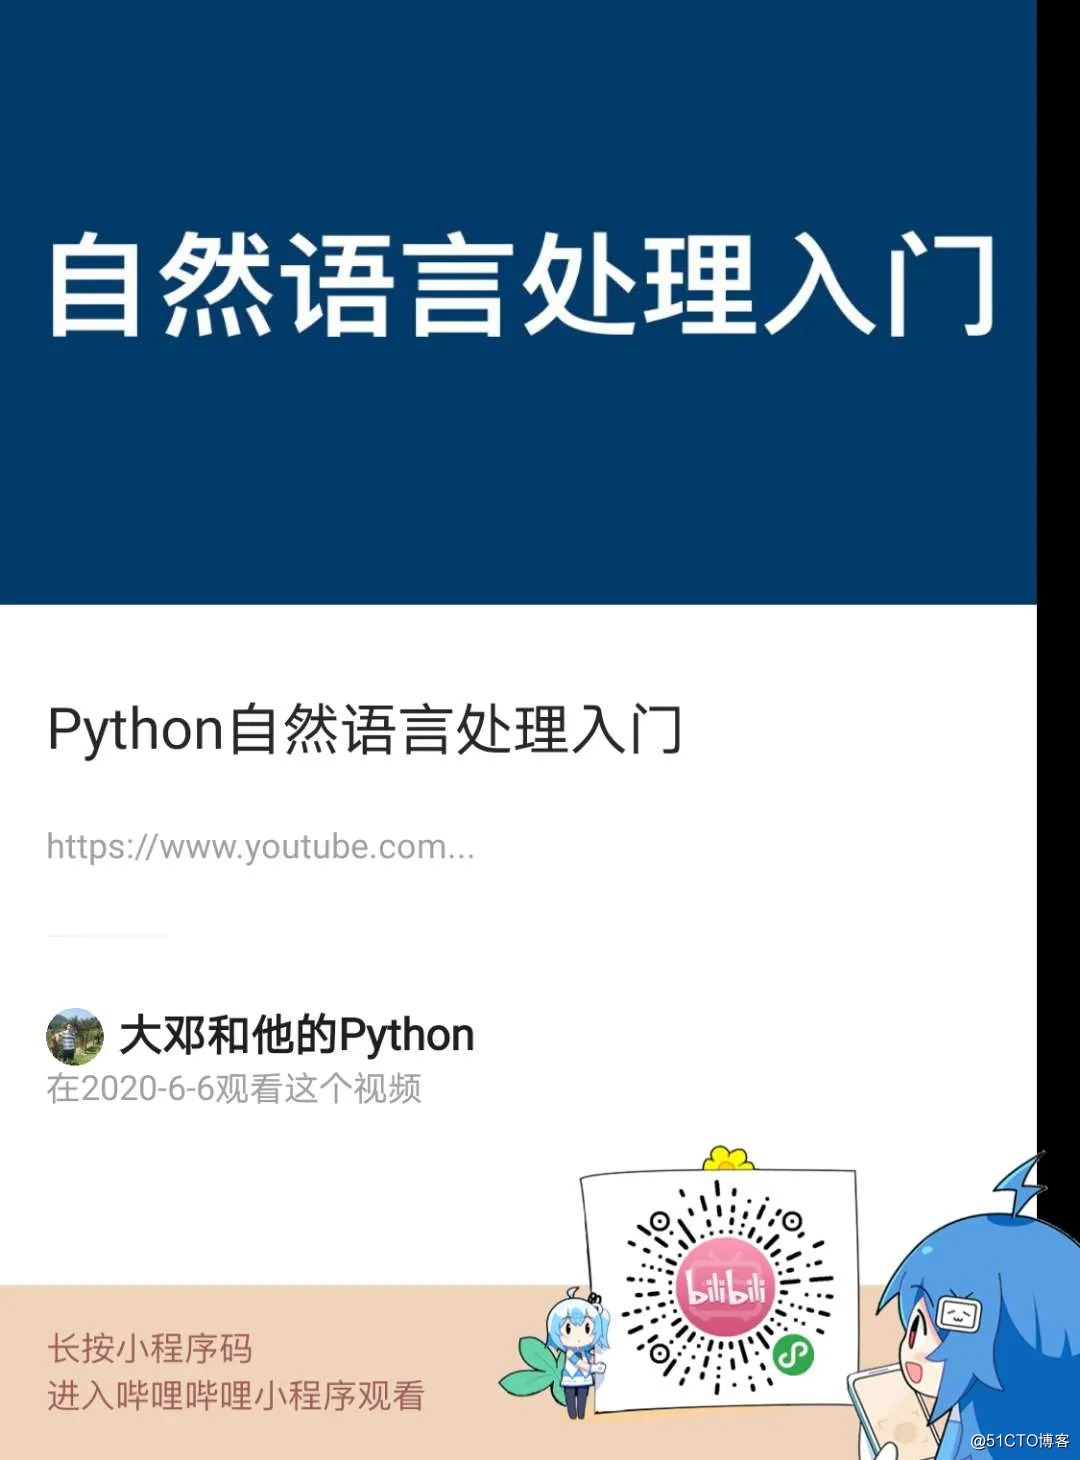 Video | Getting Started with Python Natural Language Processing